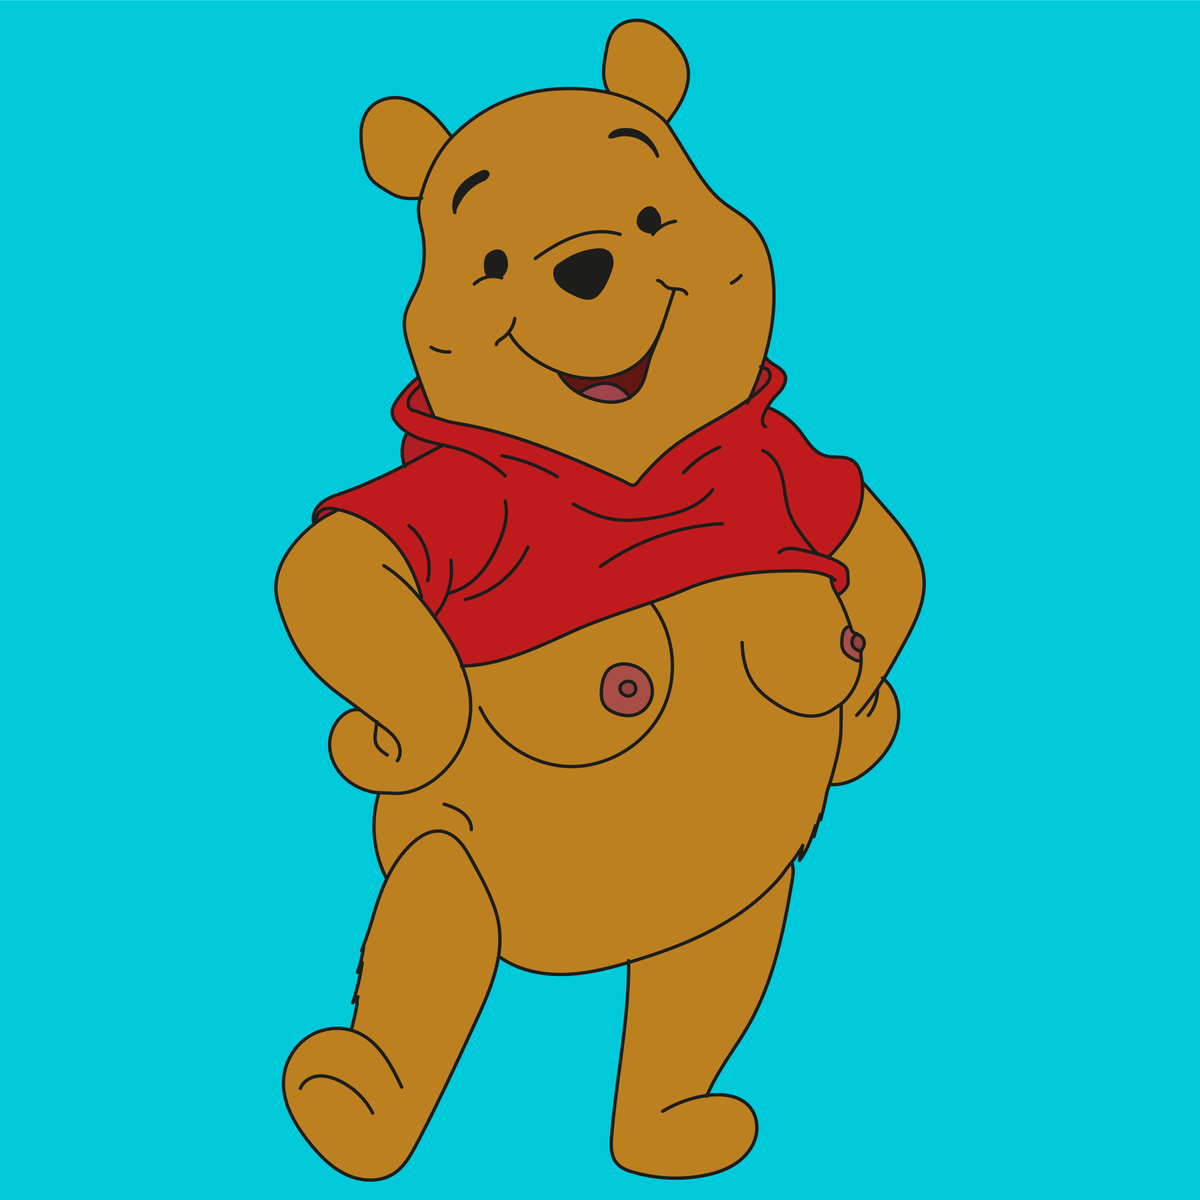 Winnie the Pooh with Tits. 